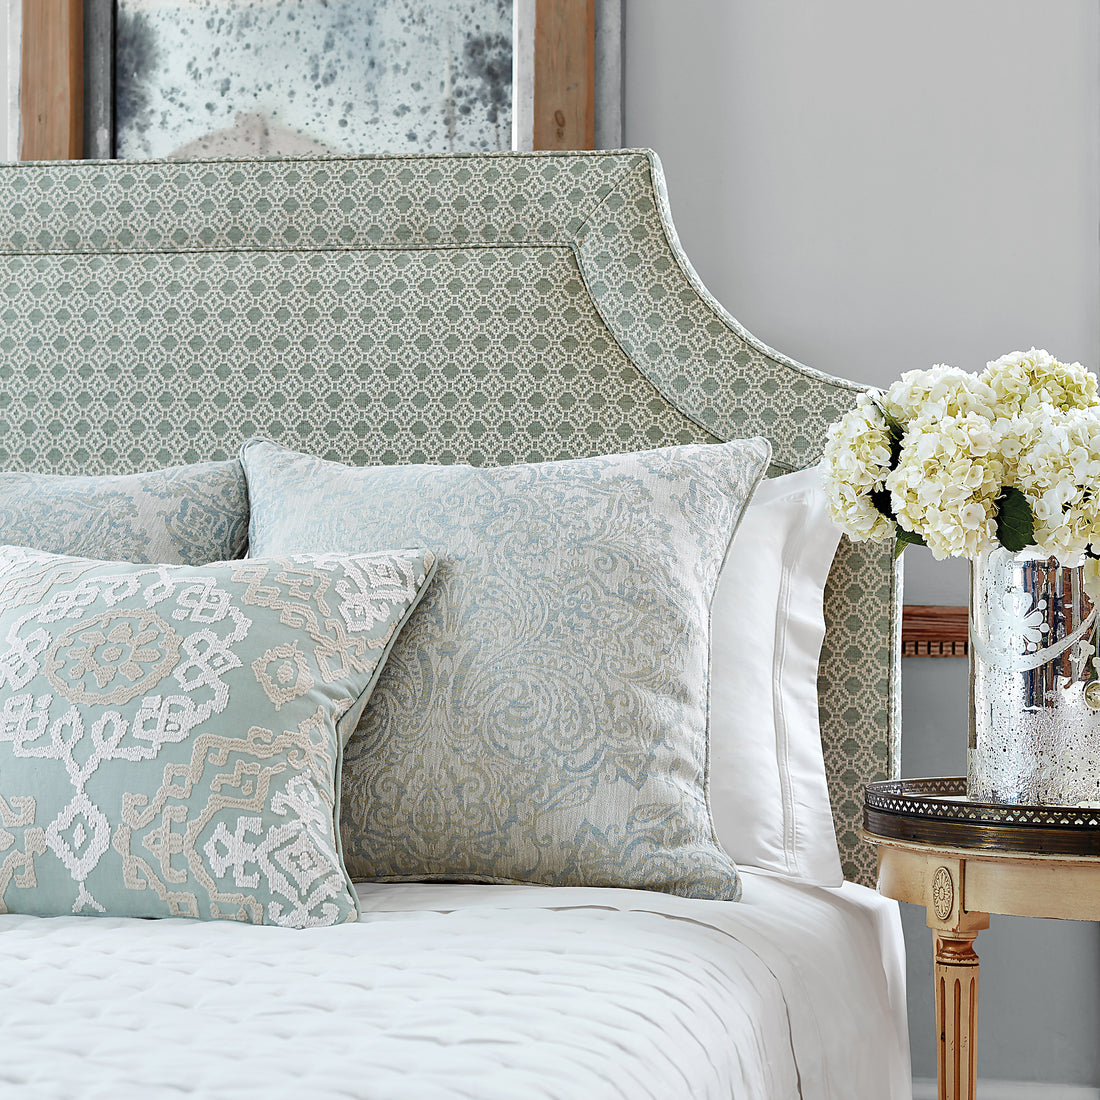 Ridgewood Headboard in Amalfi woven fabric in Sage - pattern number AW73038 - by Anna French in the Meridian collection